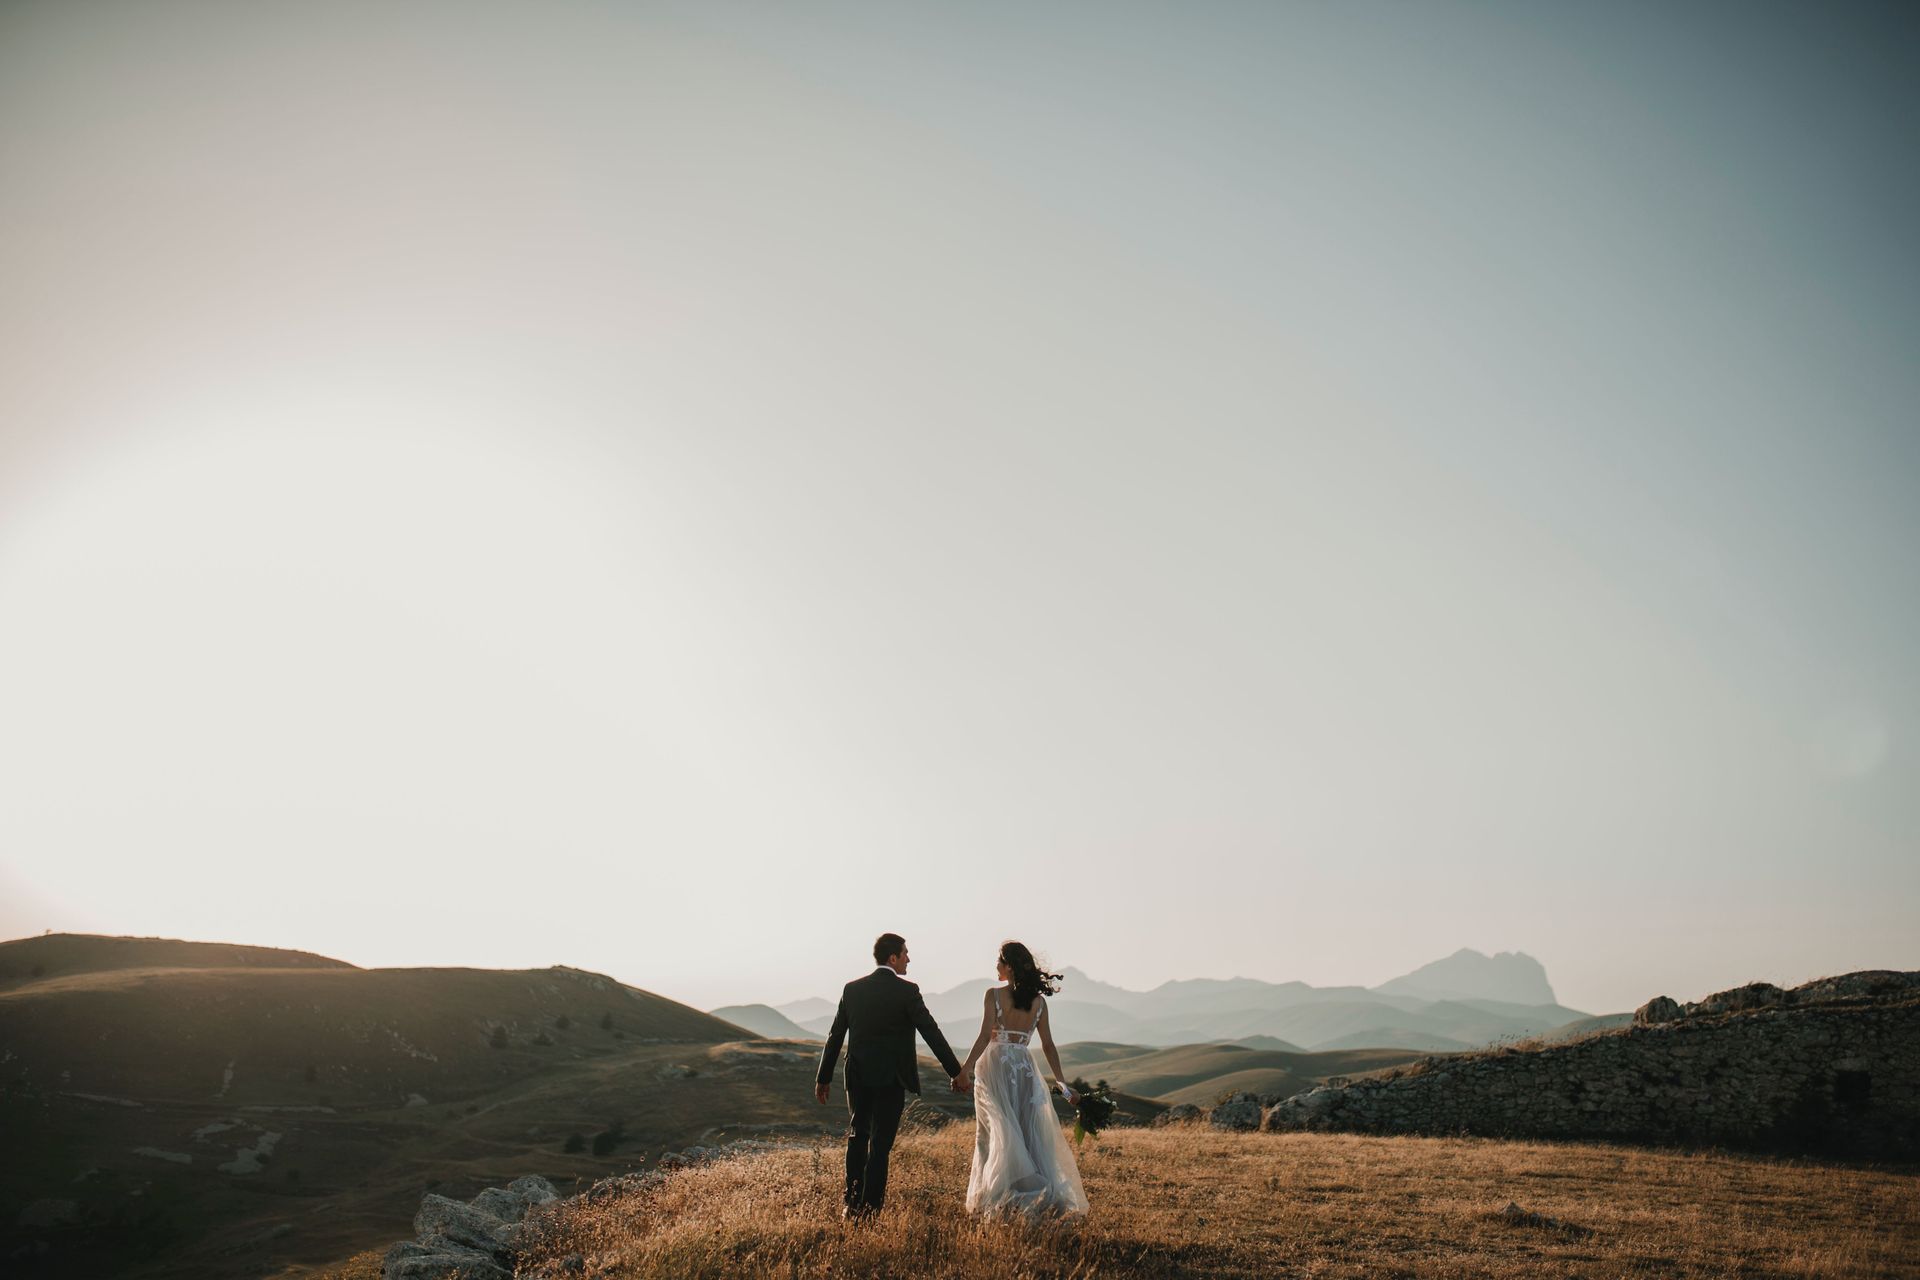 Drone photography of a newlywed couple walking into the sunset in the sierra nevada foothills.